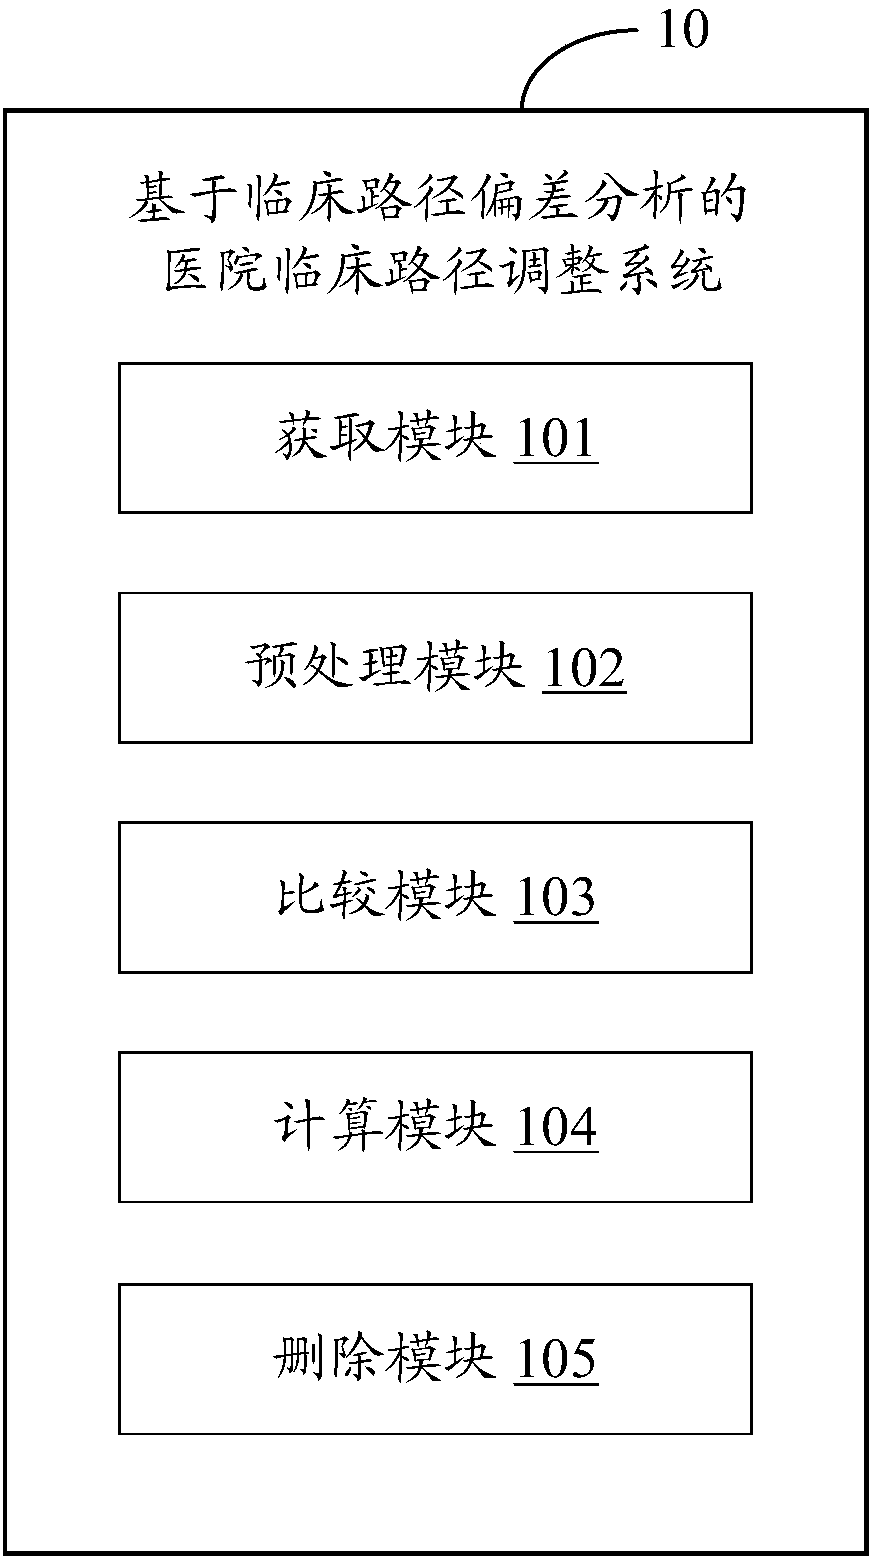 Clinical pathway adjustment system and method for hospital based on clinical pathway deviation analysis